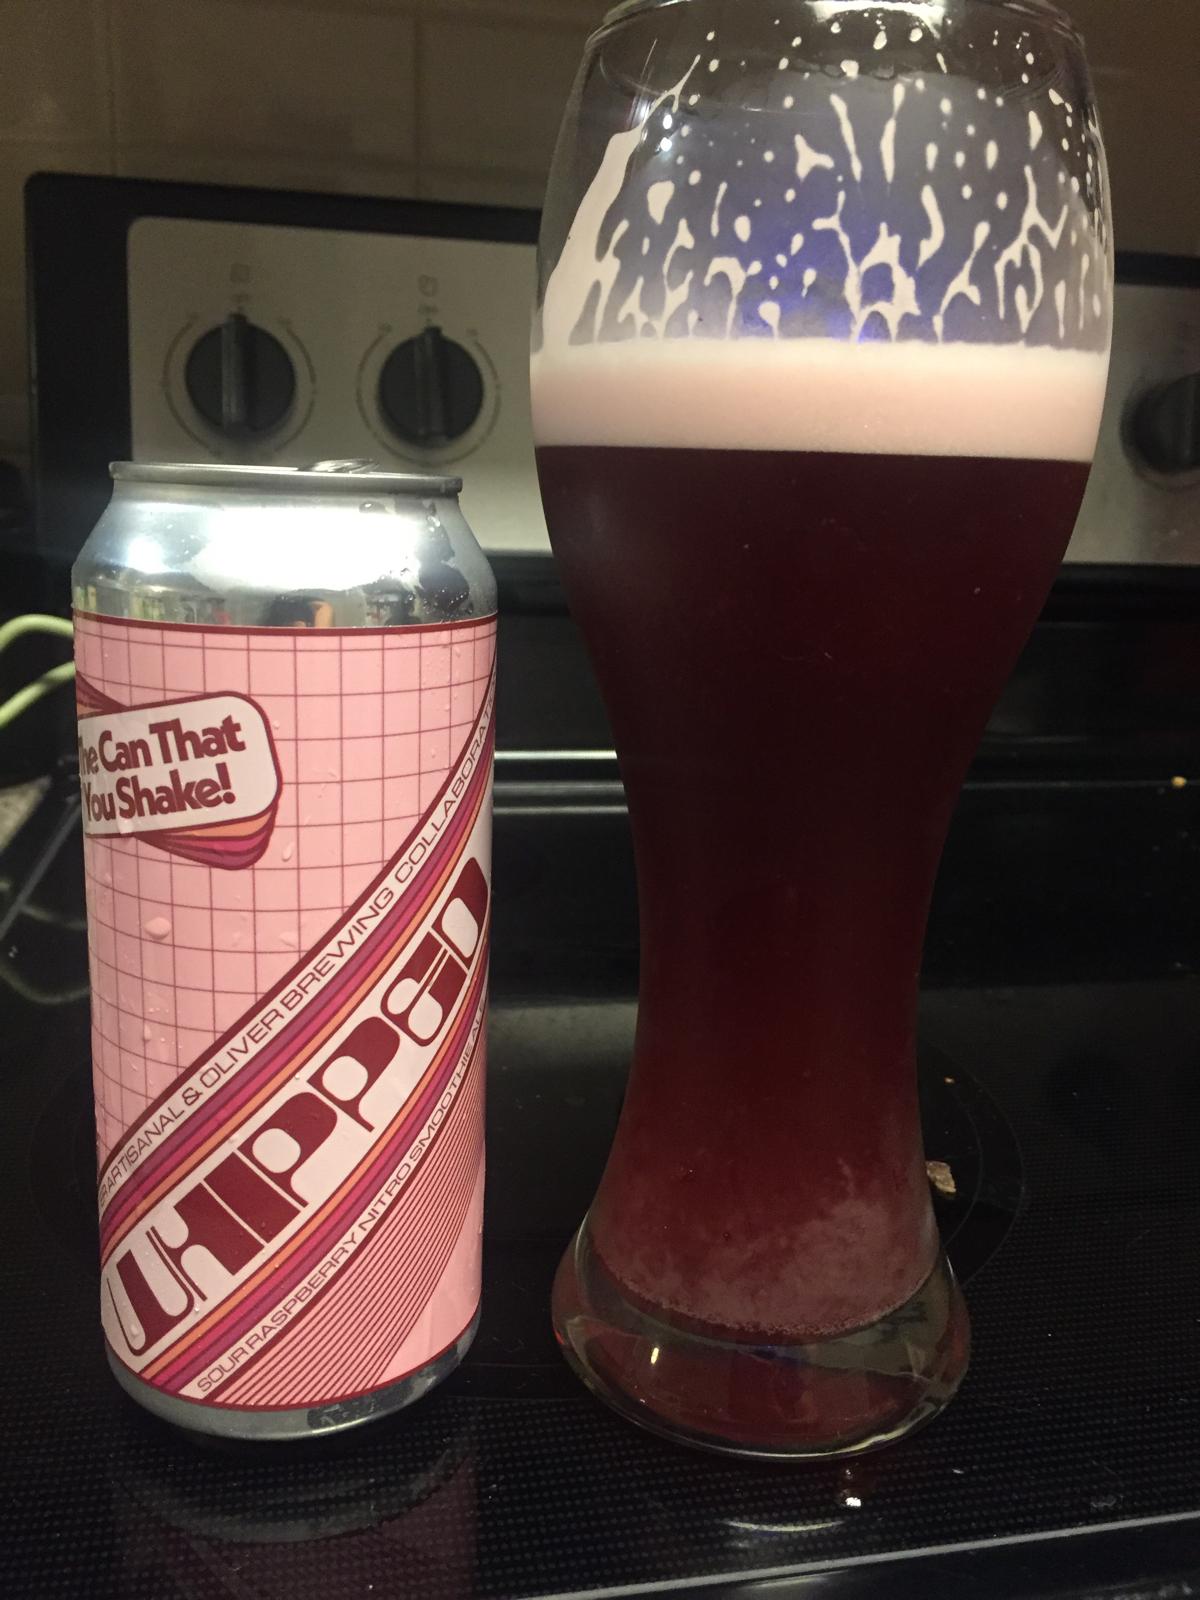 Whipped: Sour Raspberry Nitro Smoothie Ale (Collaboration With Stillwater Artisanal Ales & Oliver Brewing)